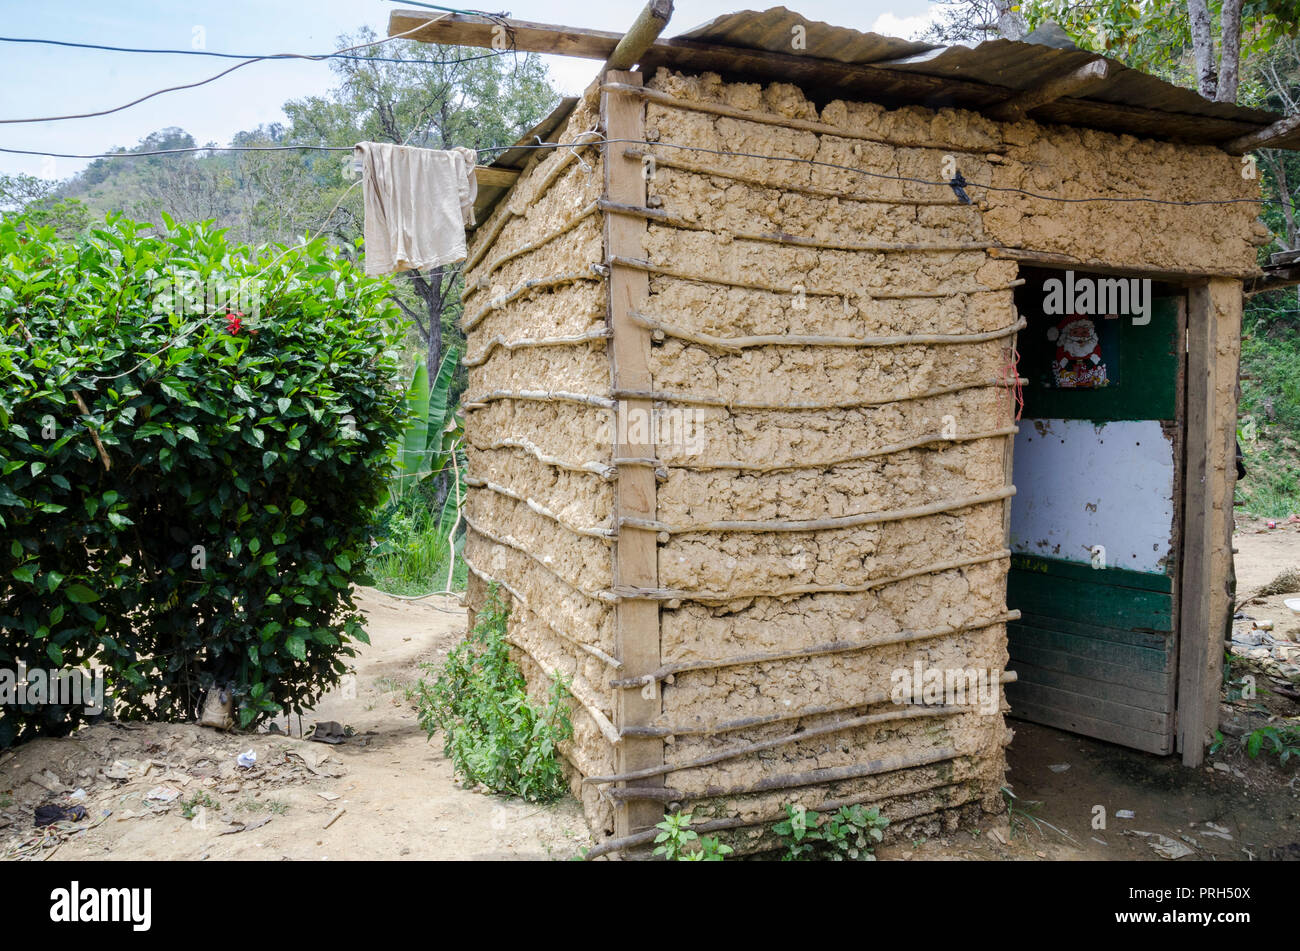 Bathroom or sanitary latrines made of bahareque (houses from sticks or reeds interwoven and mud covering them) are normally used in rural areas. Extre Stock Photo